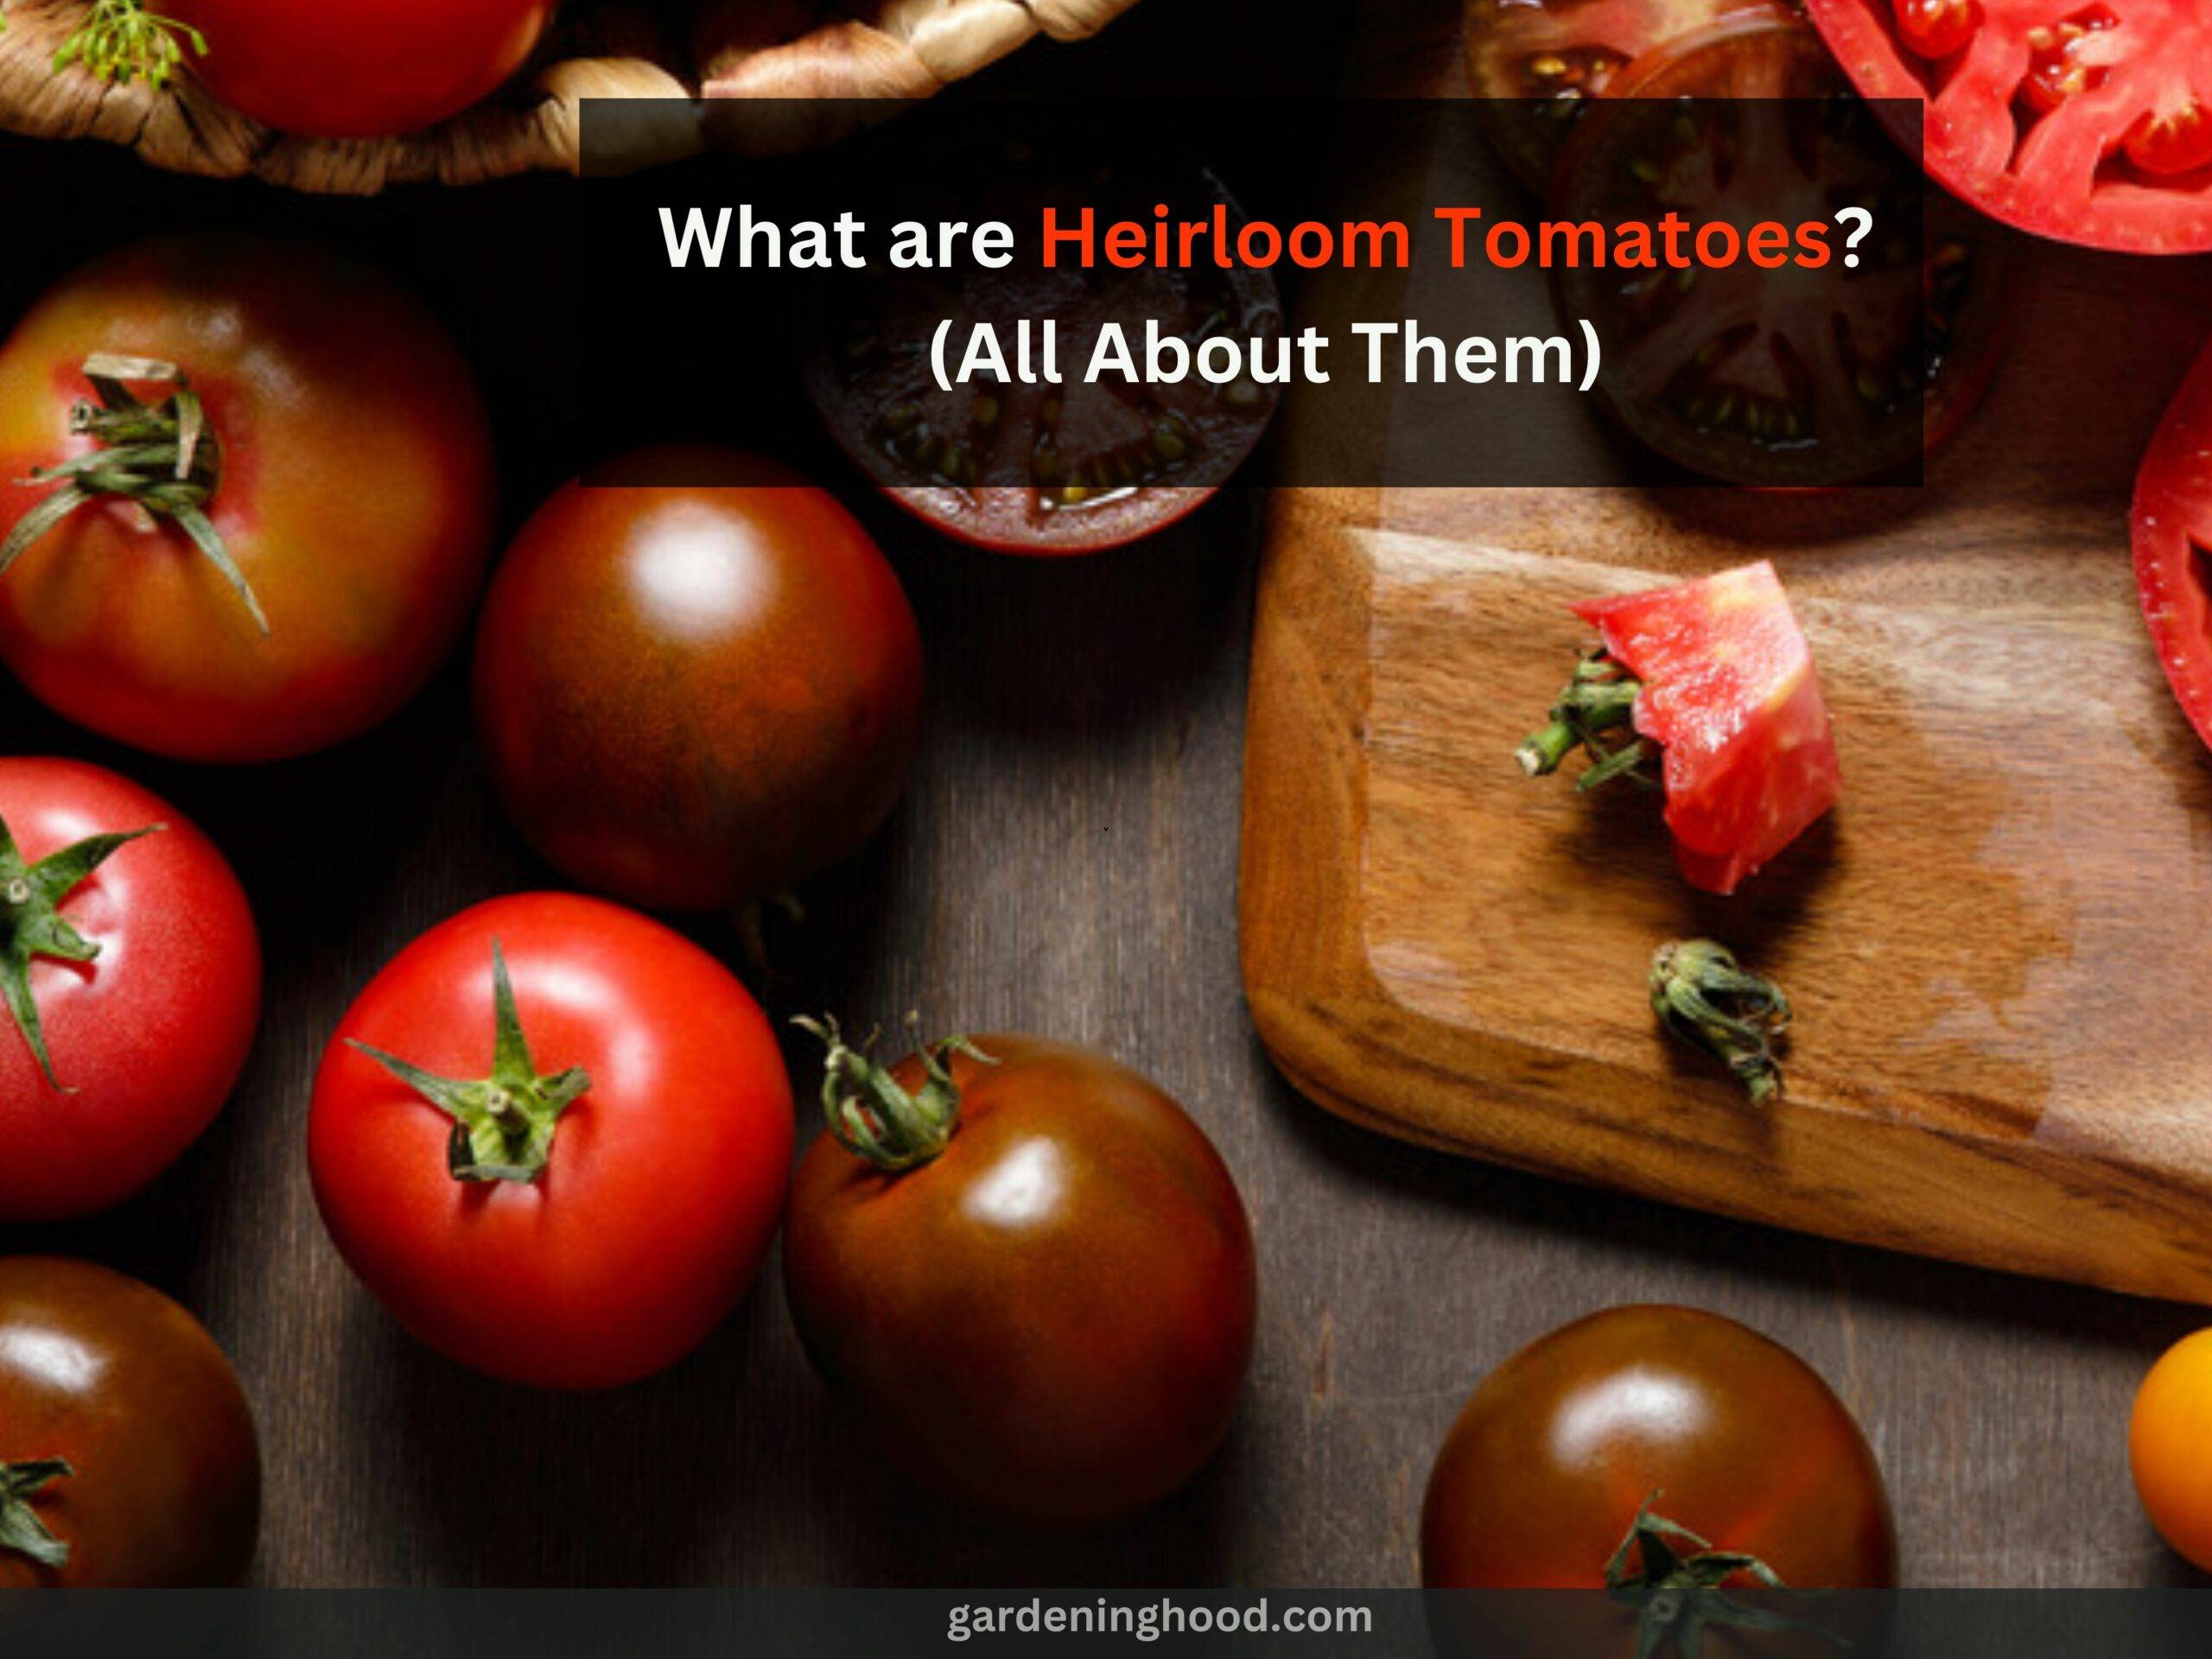 What are Heirloom Tomatoes? (All About Them)